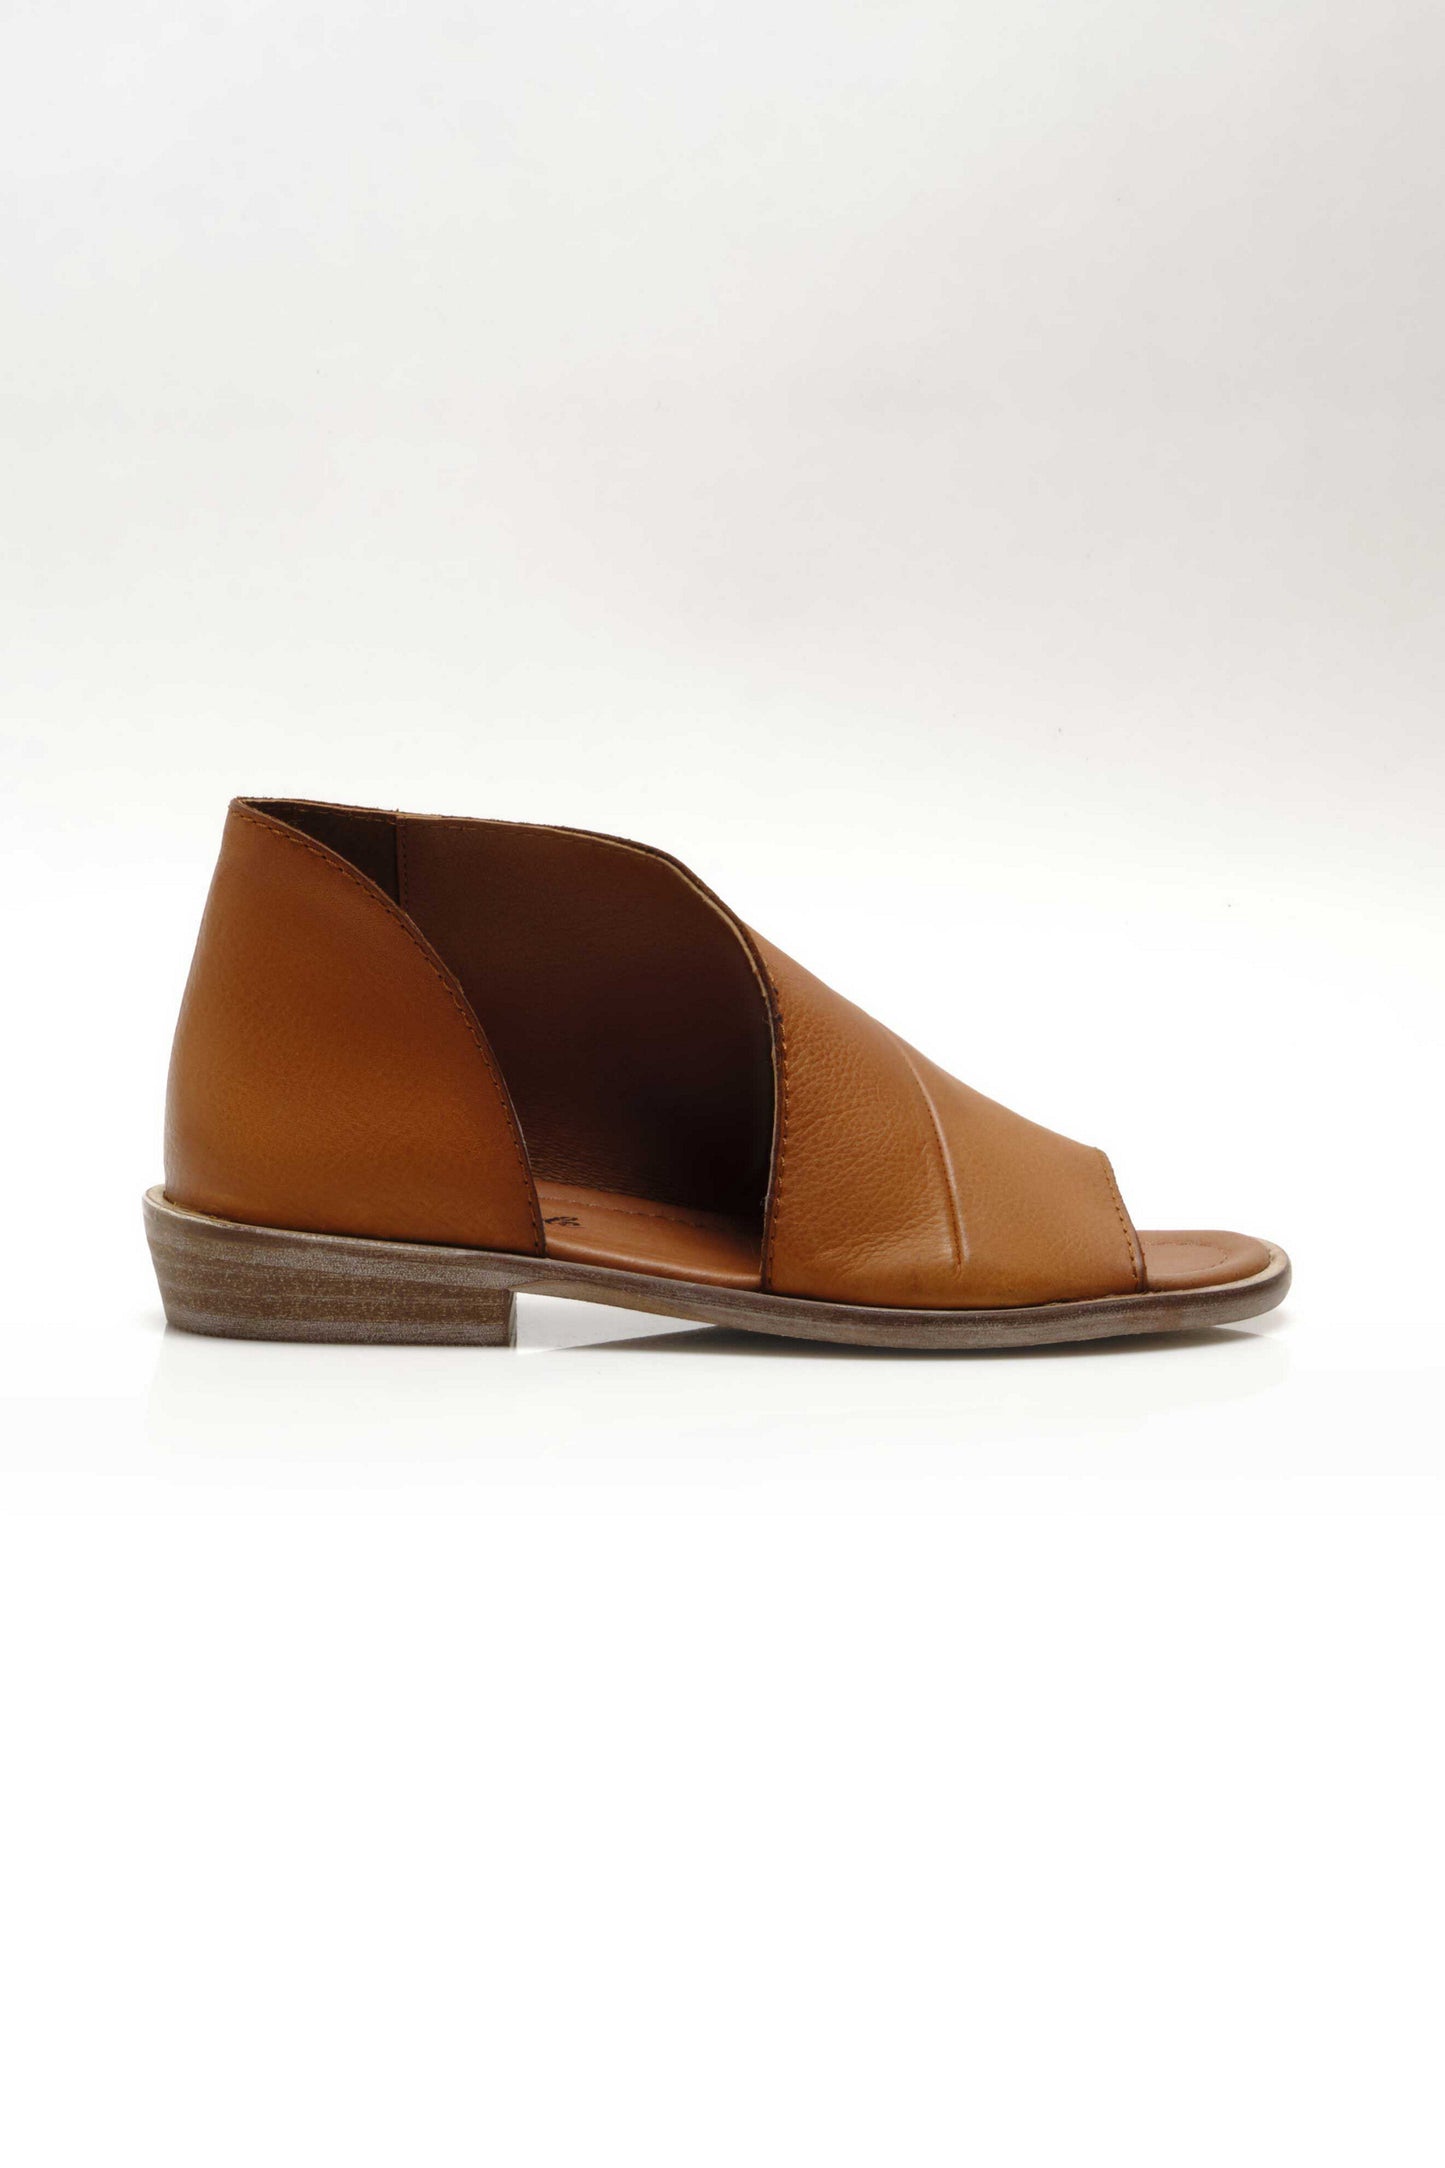 Side profiles view of Free People's Mont Blanc Sandal in Tan Leather